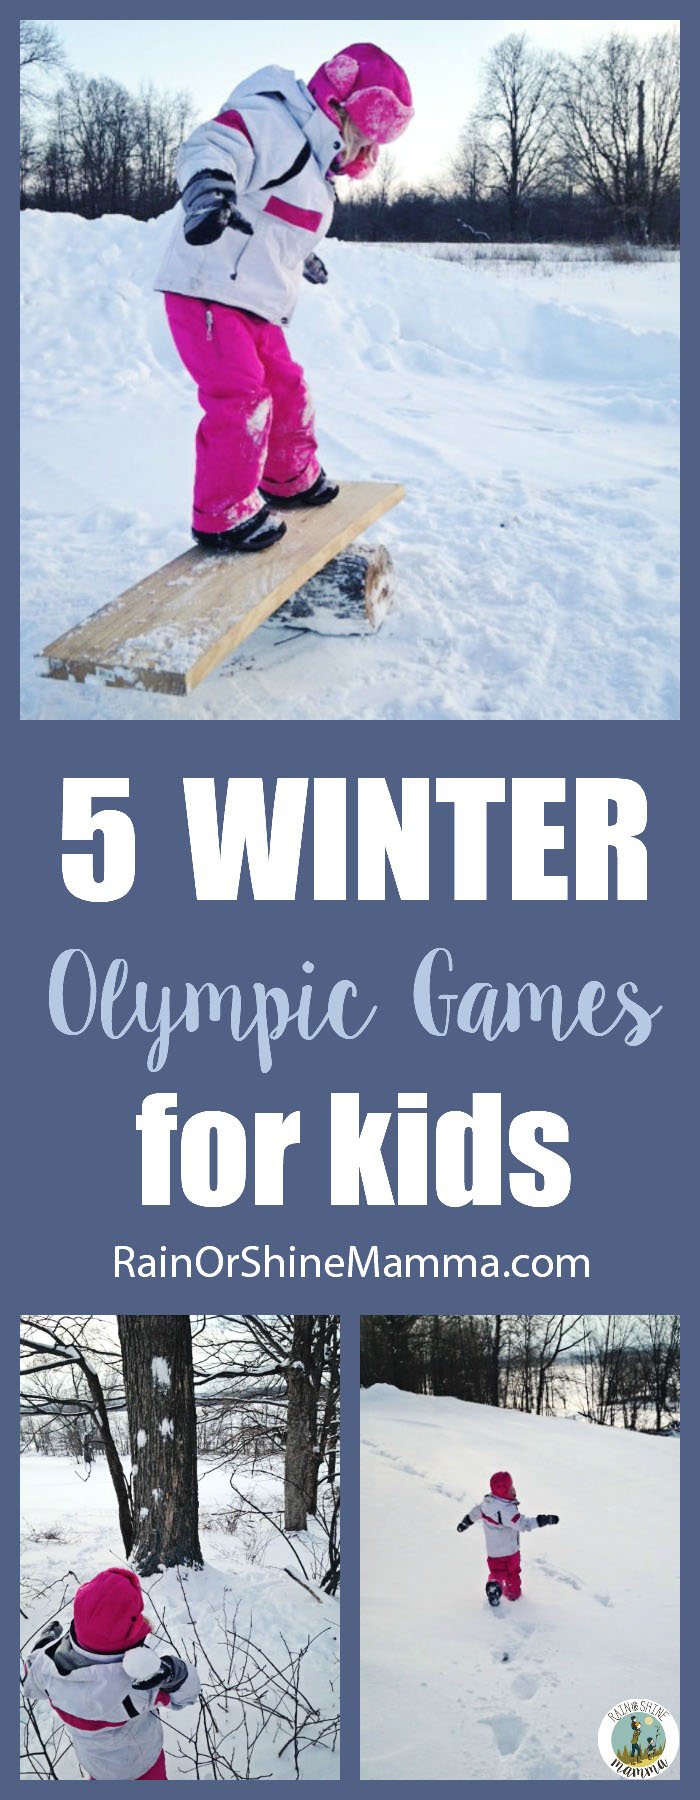 5 Fun Winter Olympic Games for Kids. Perfect outdoor activities for the backyard!  #olympics #olympic #games #kids #activities #backyard #winter #snow